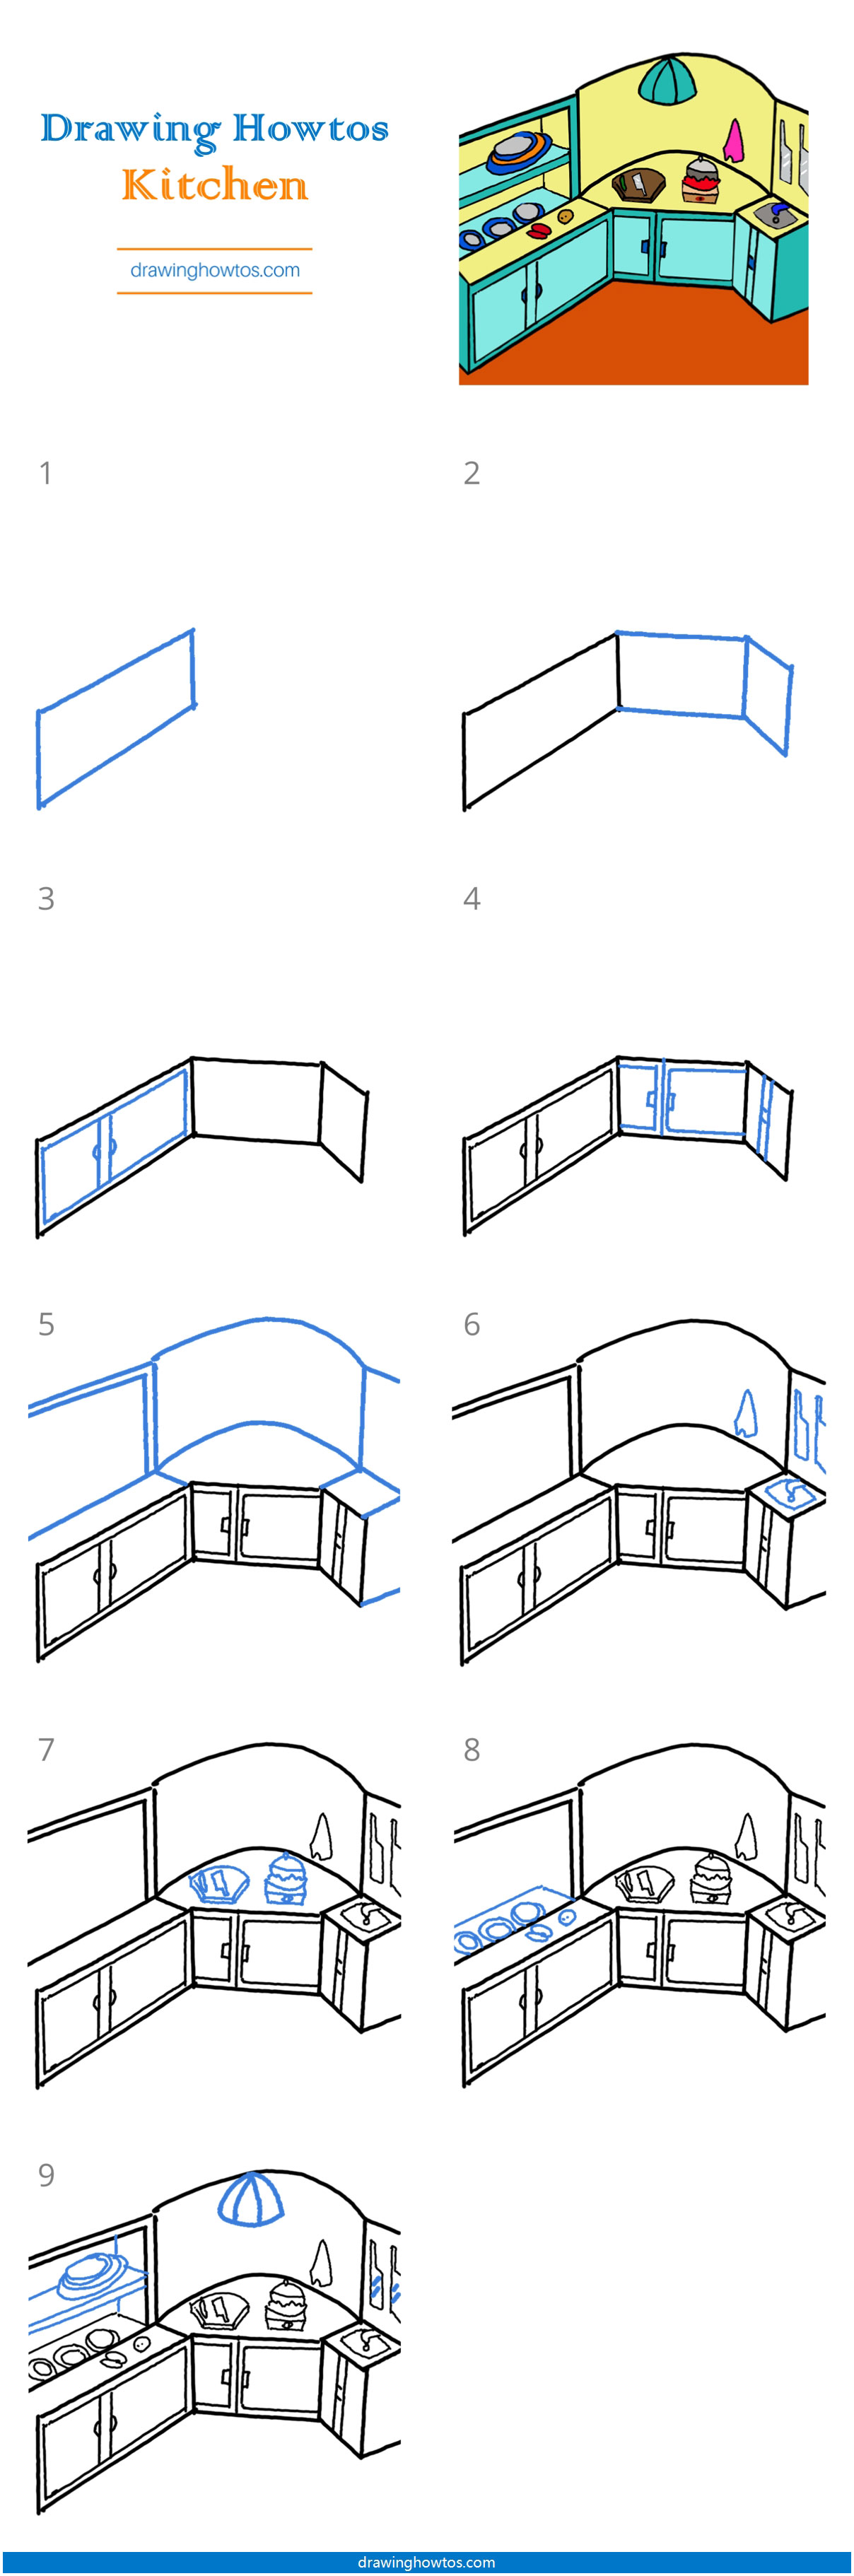 How to Draw a Kitchen Step by Step